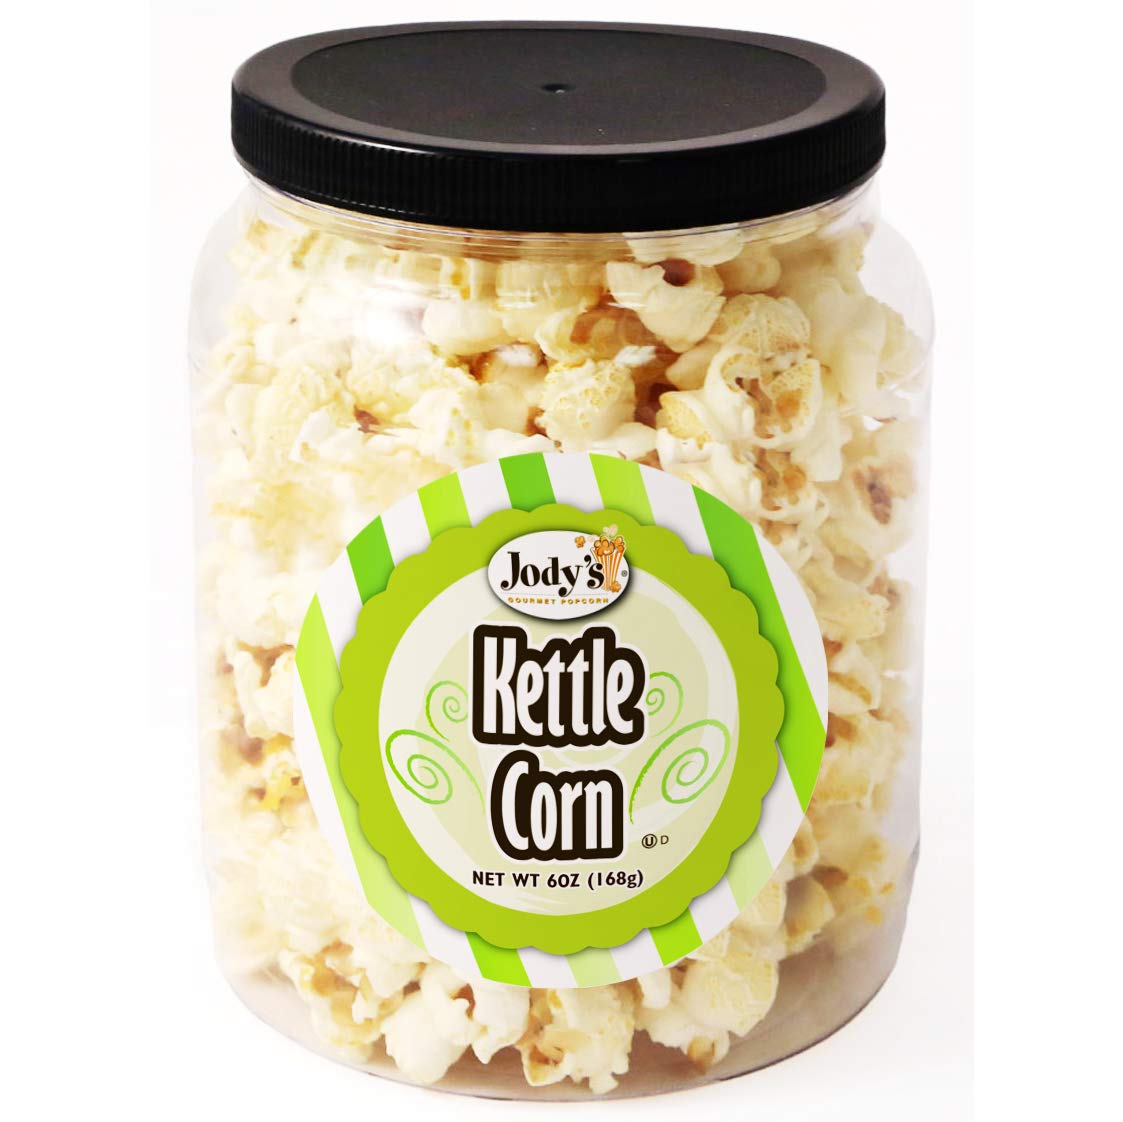 Jody's Gourmet Popcorn Round Jar Kettle Corn, 5 Ounce. Gluten-Free, No Preservatives, Kosher Certified, Made with Non-GMO Popcorn Kernels. Sweet and Salty Kettle Corn, the perfect flavorful, indulgent snack.